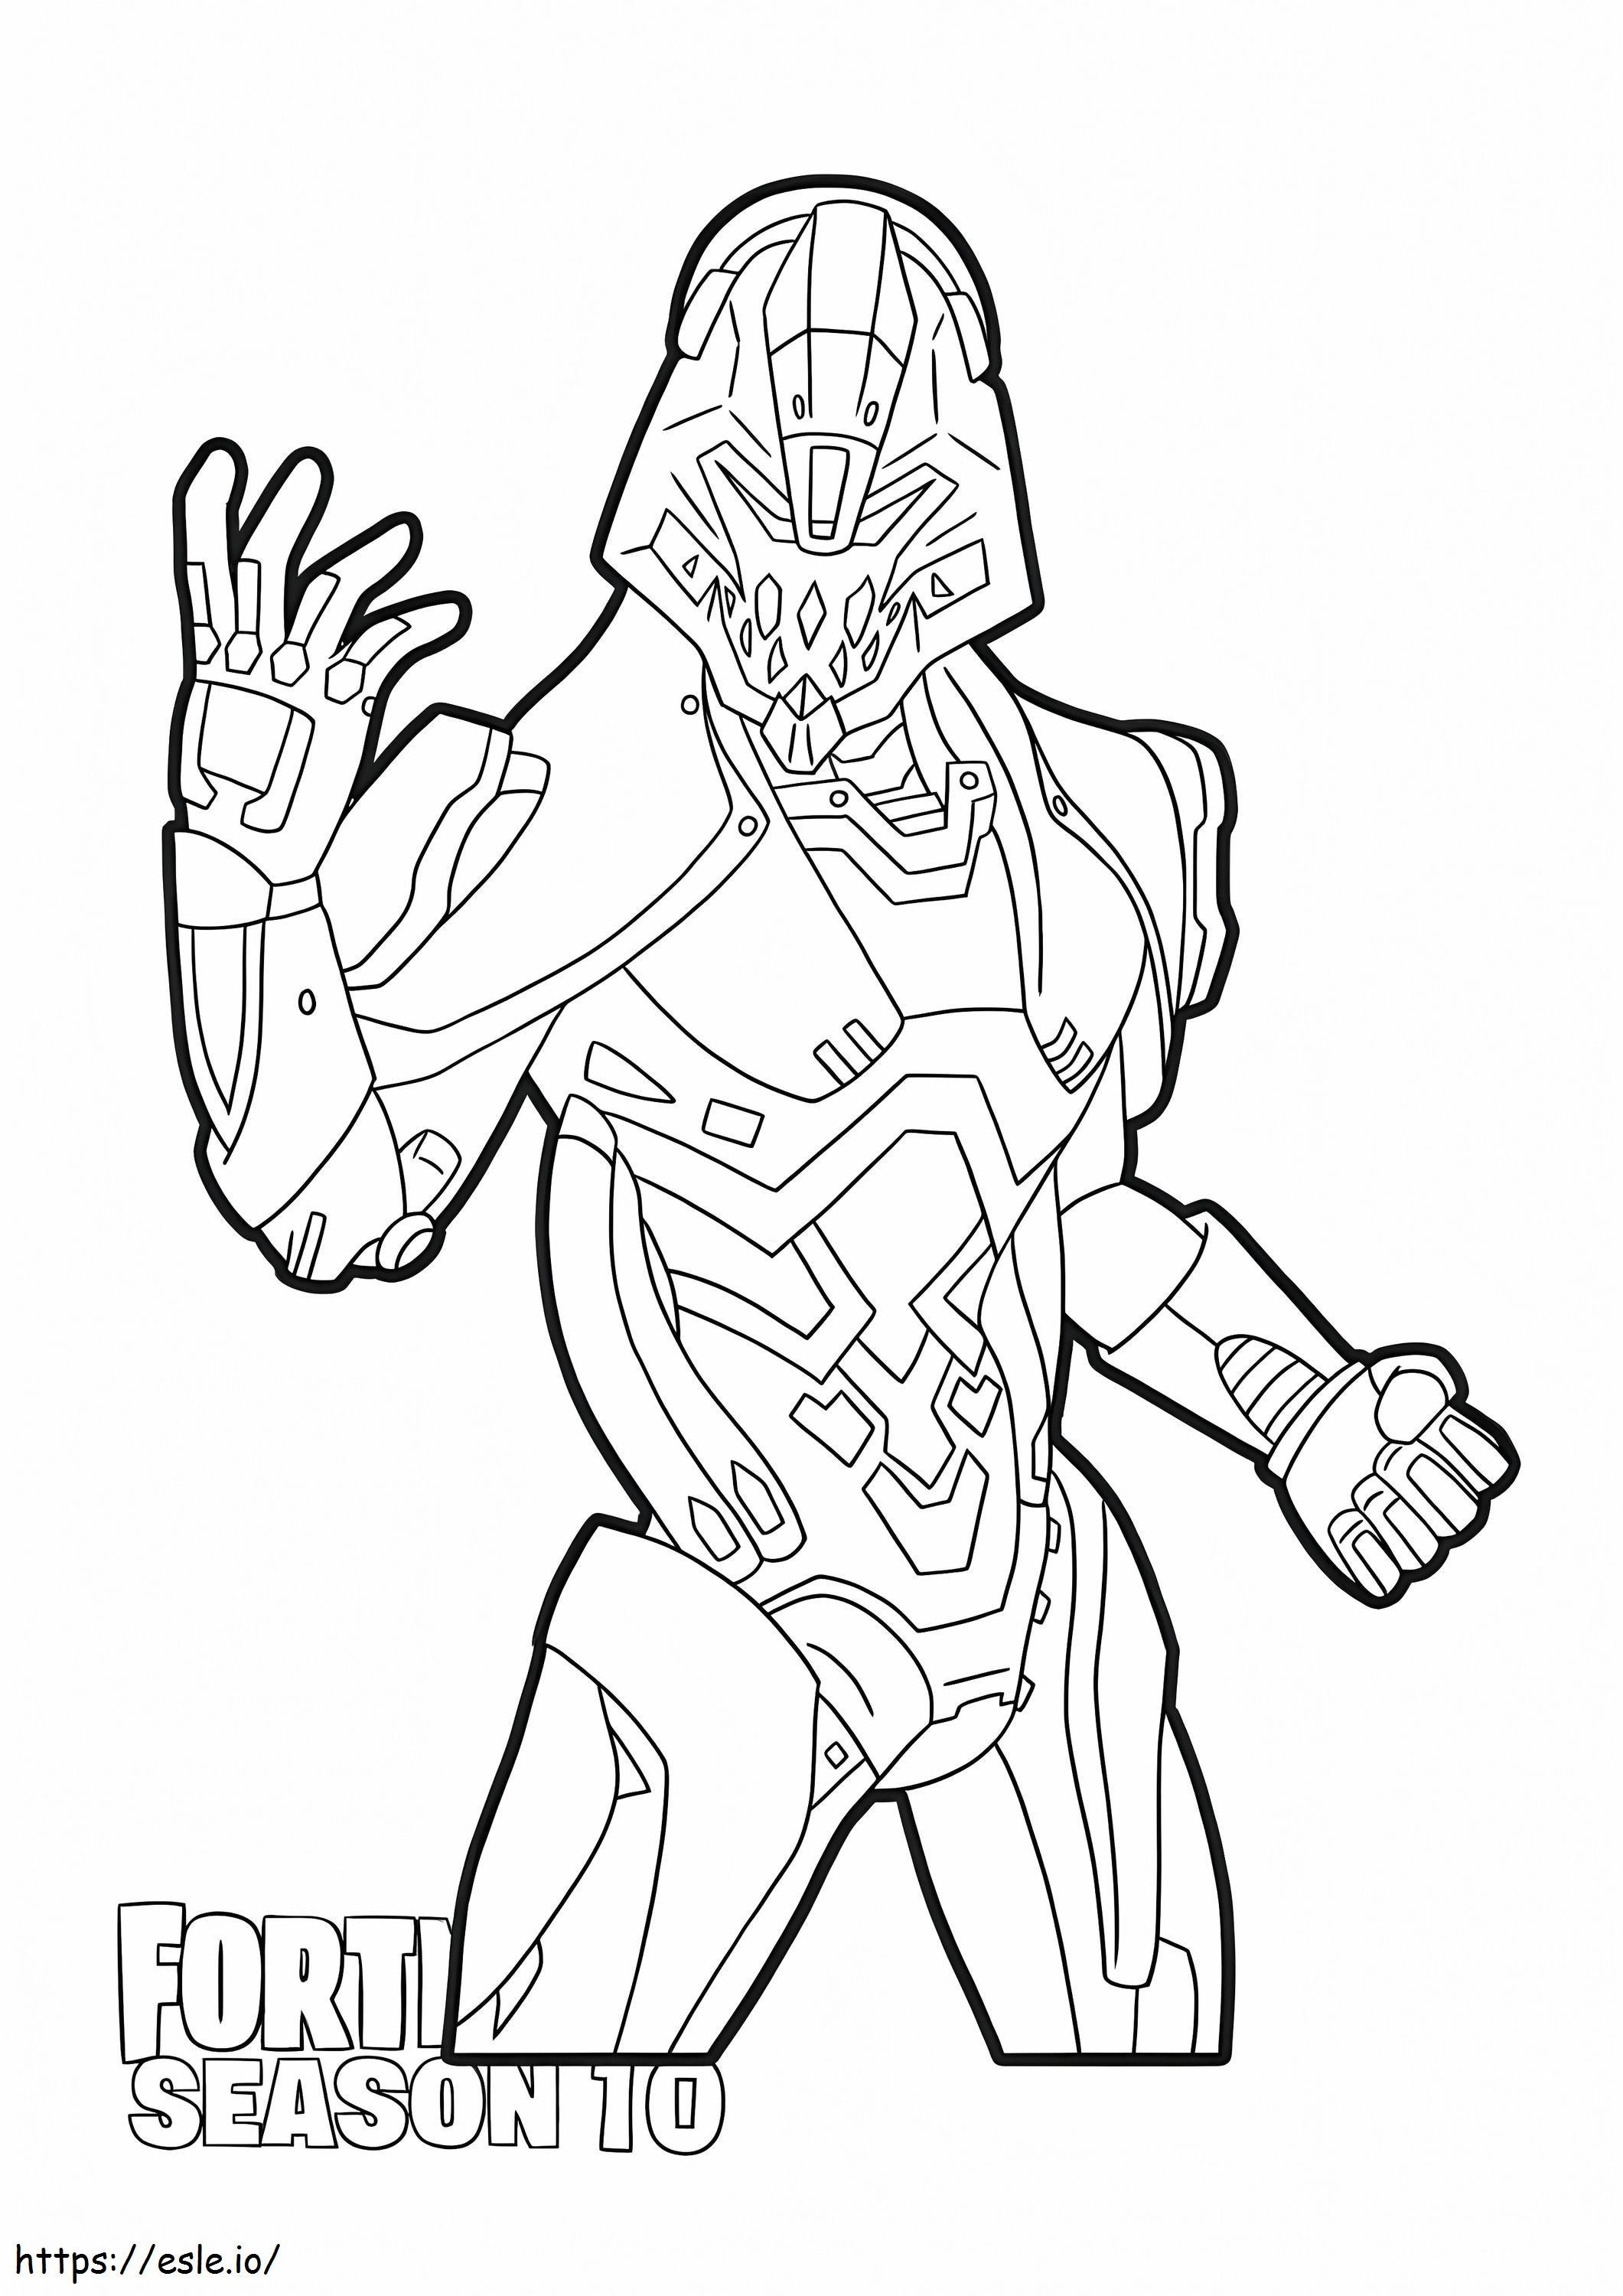 Oppressor From Fortnite coloring page